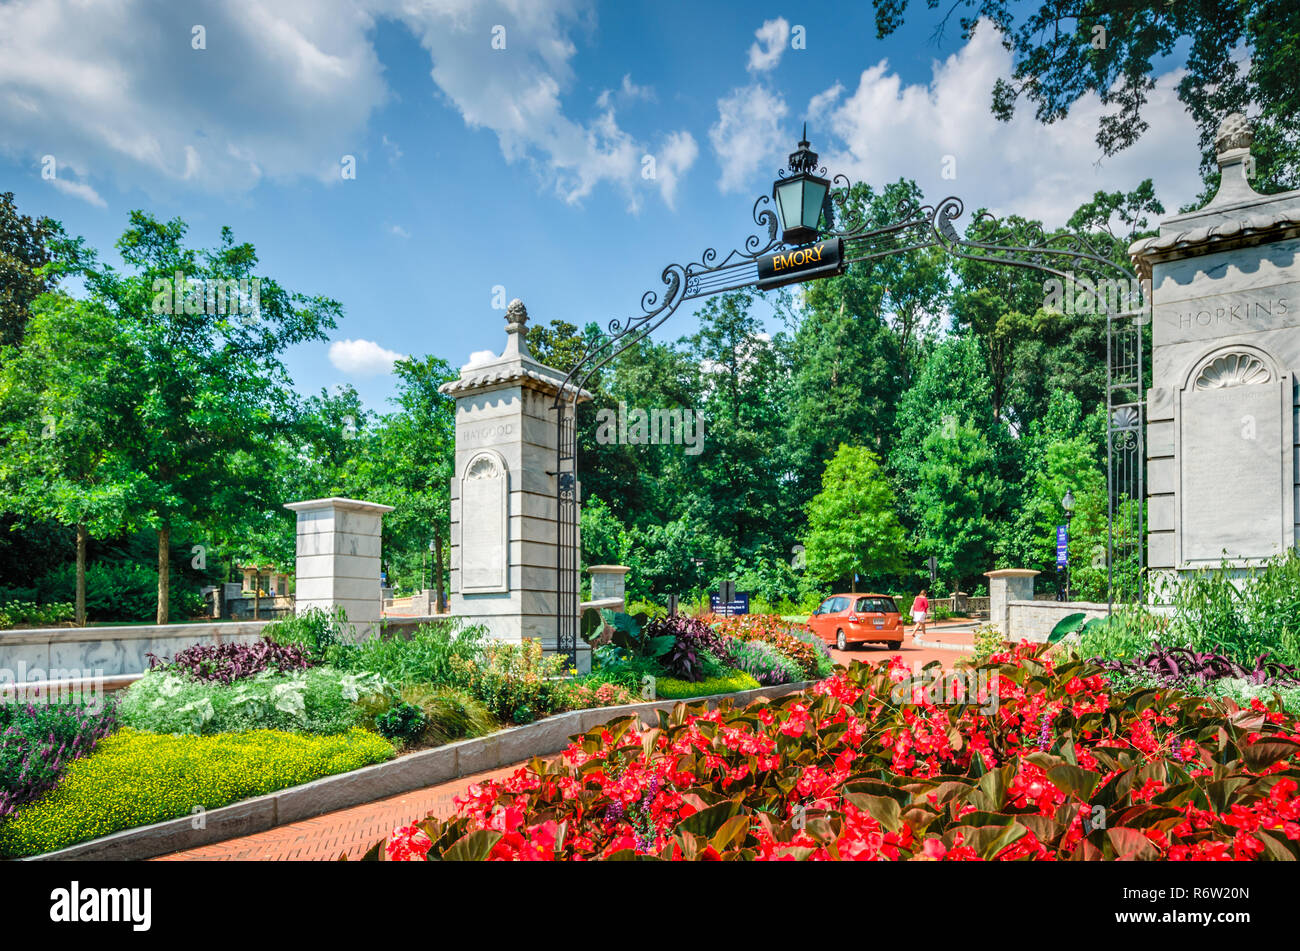 Flowers bloom at the entrance to Emory University, July 7, 2014, in Atlanta, Georgia. Emory was founded in 1836 and is a private research university. Stock Photo